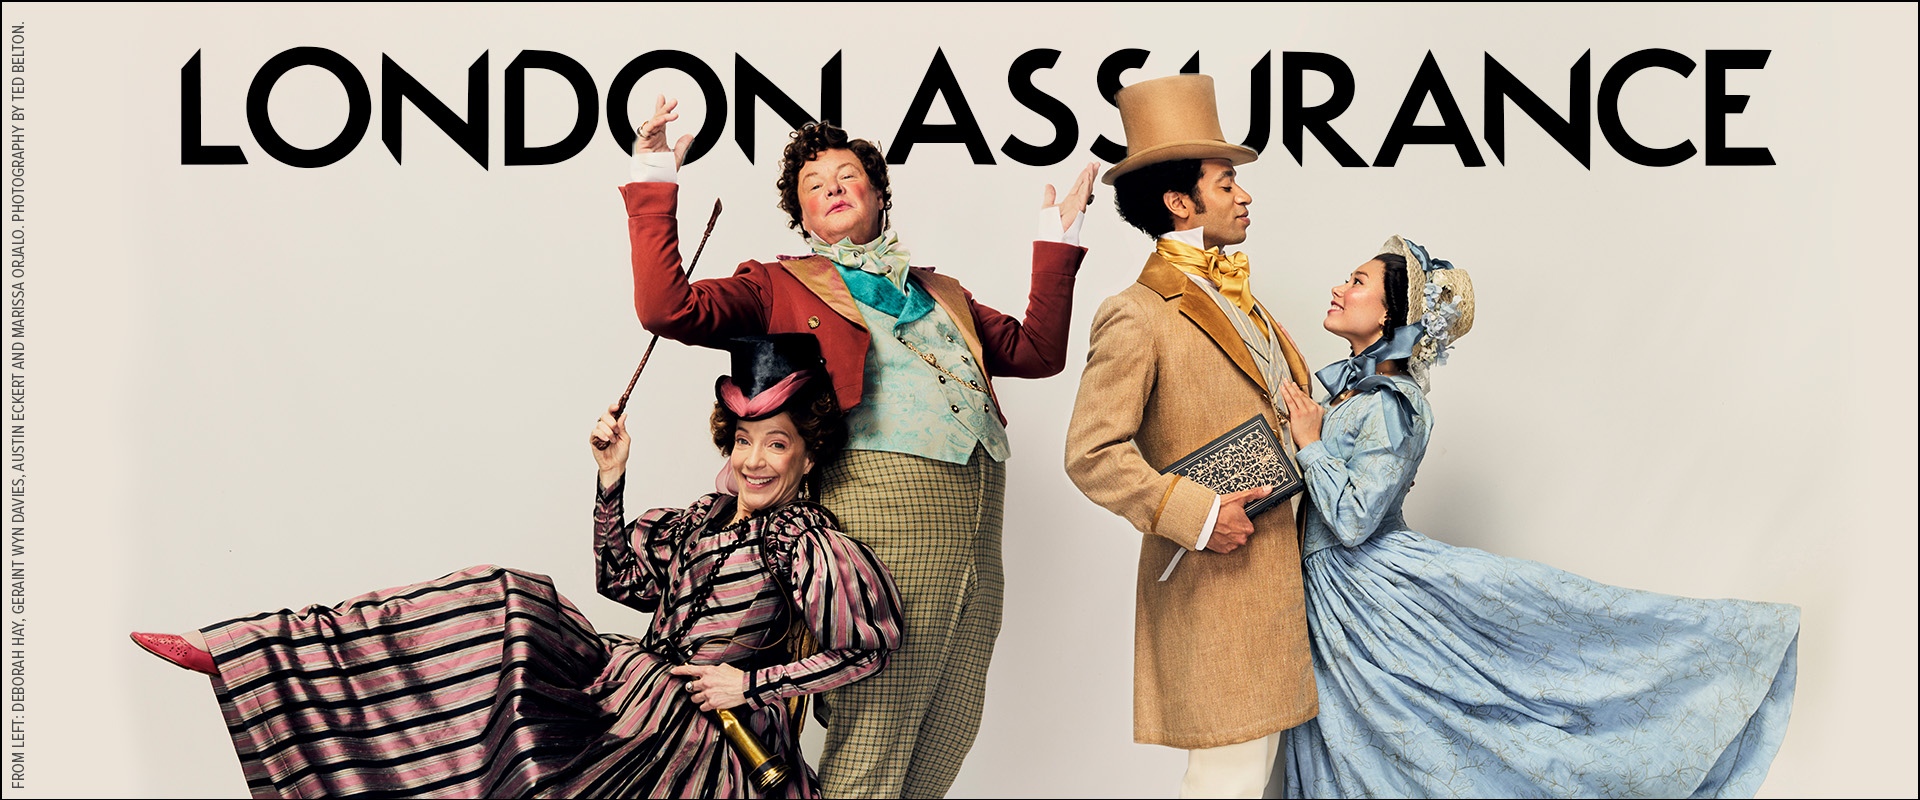 London Assurance at Stratford Festival Theatre poster